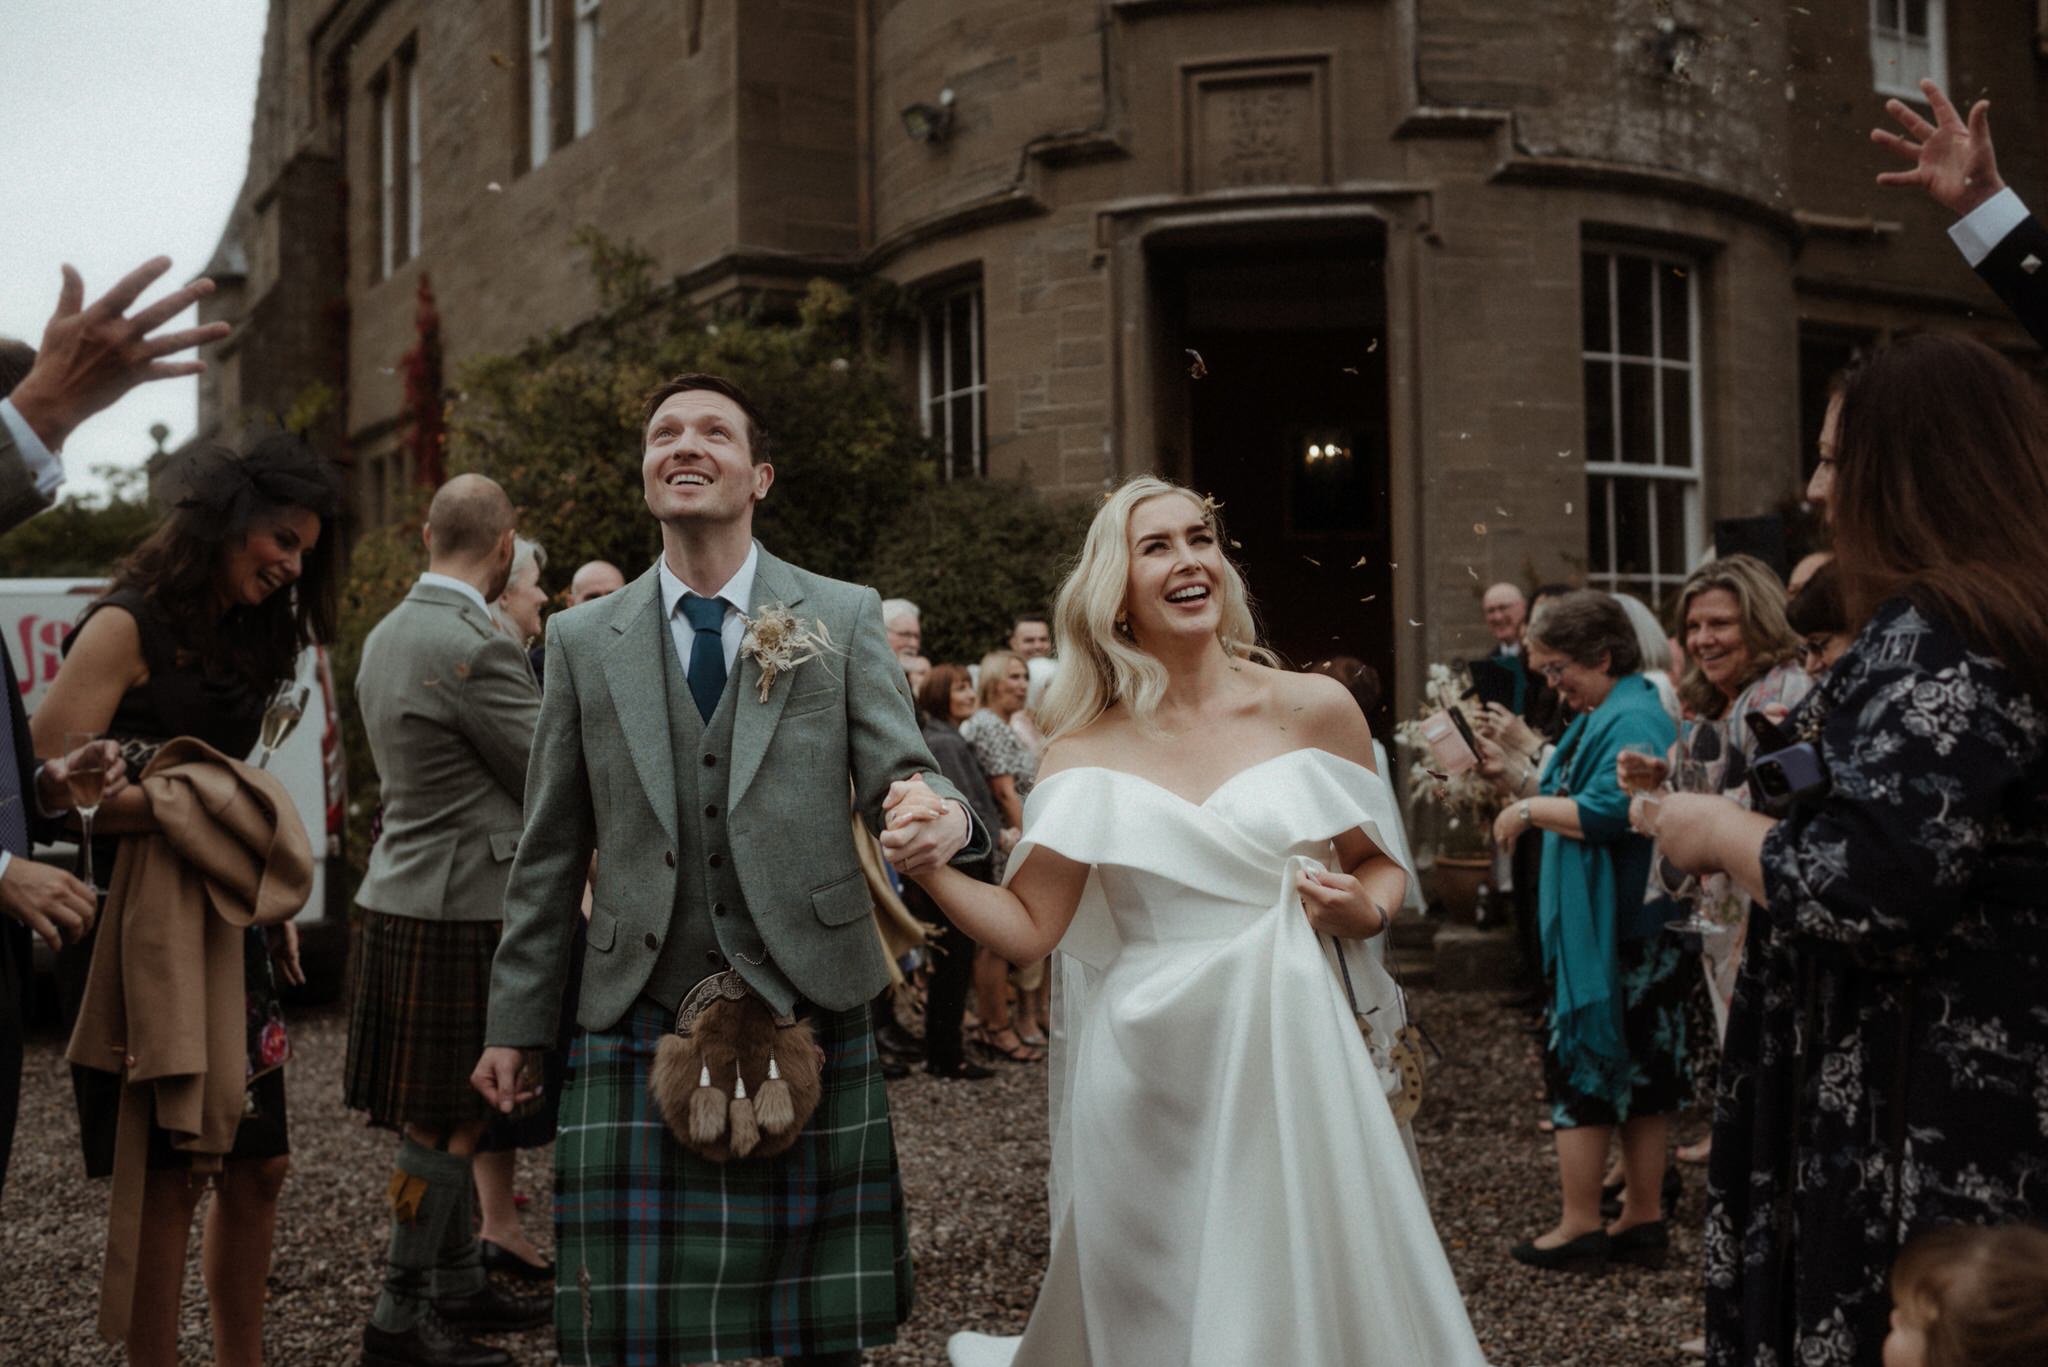 confetti throw during a wedding at birkhill house in Scotland with Bride and groom running and laughing